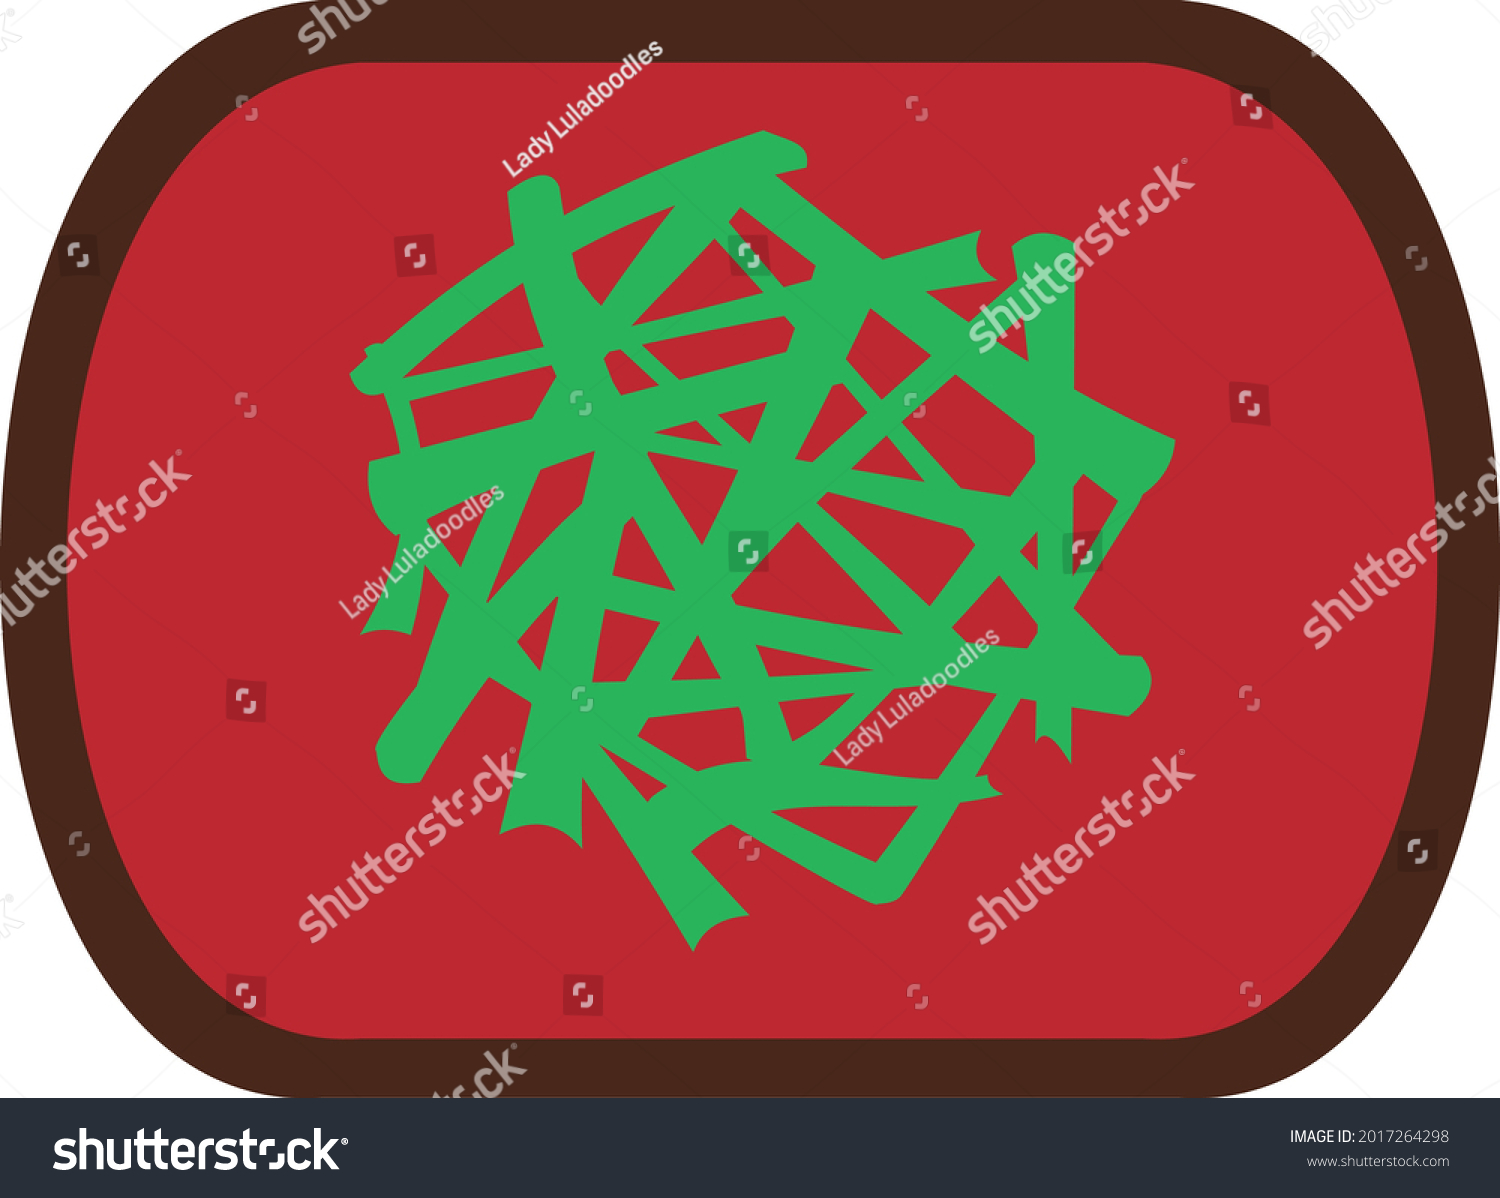 SVG of Curved rectangle dark brown bordered chocolate candy graphic with red centre and green shredded candied Angelica decoration. Layered confectionery SVG svg